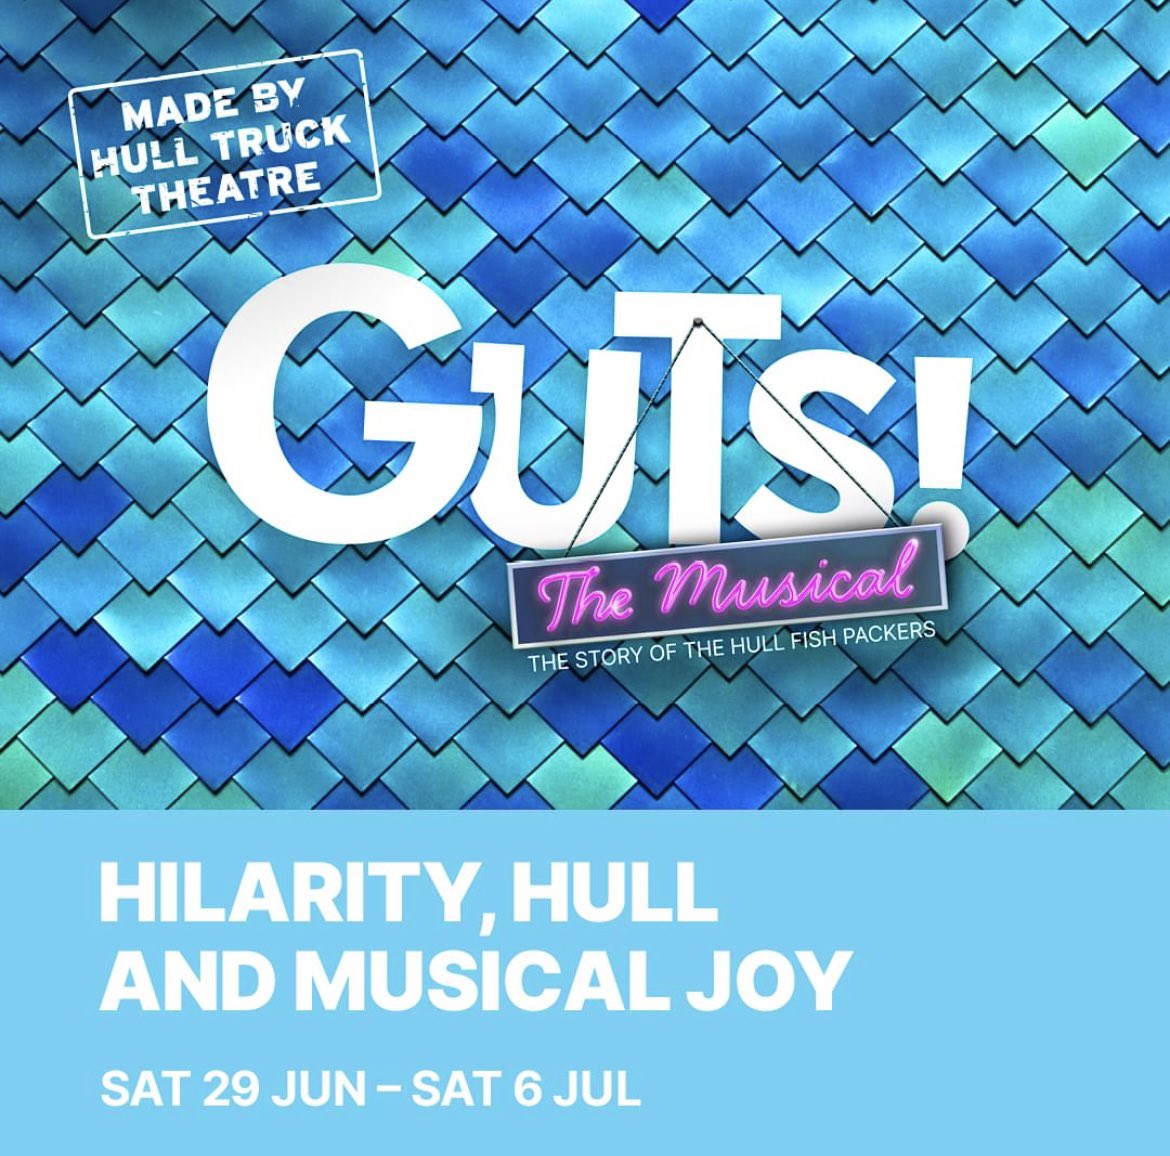 It was smelling a bit ‘fishy’ with excitement tonight @HullTruck as rehearsals kicked off for “GUTS The Musical”, written by @Lennon0798 🐟 Amazing how quickly this space felt like home.🥰The welcoming aura of a building is often the first sign of a good team inside. Good stuff!